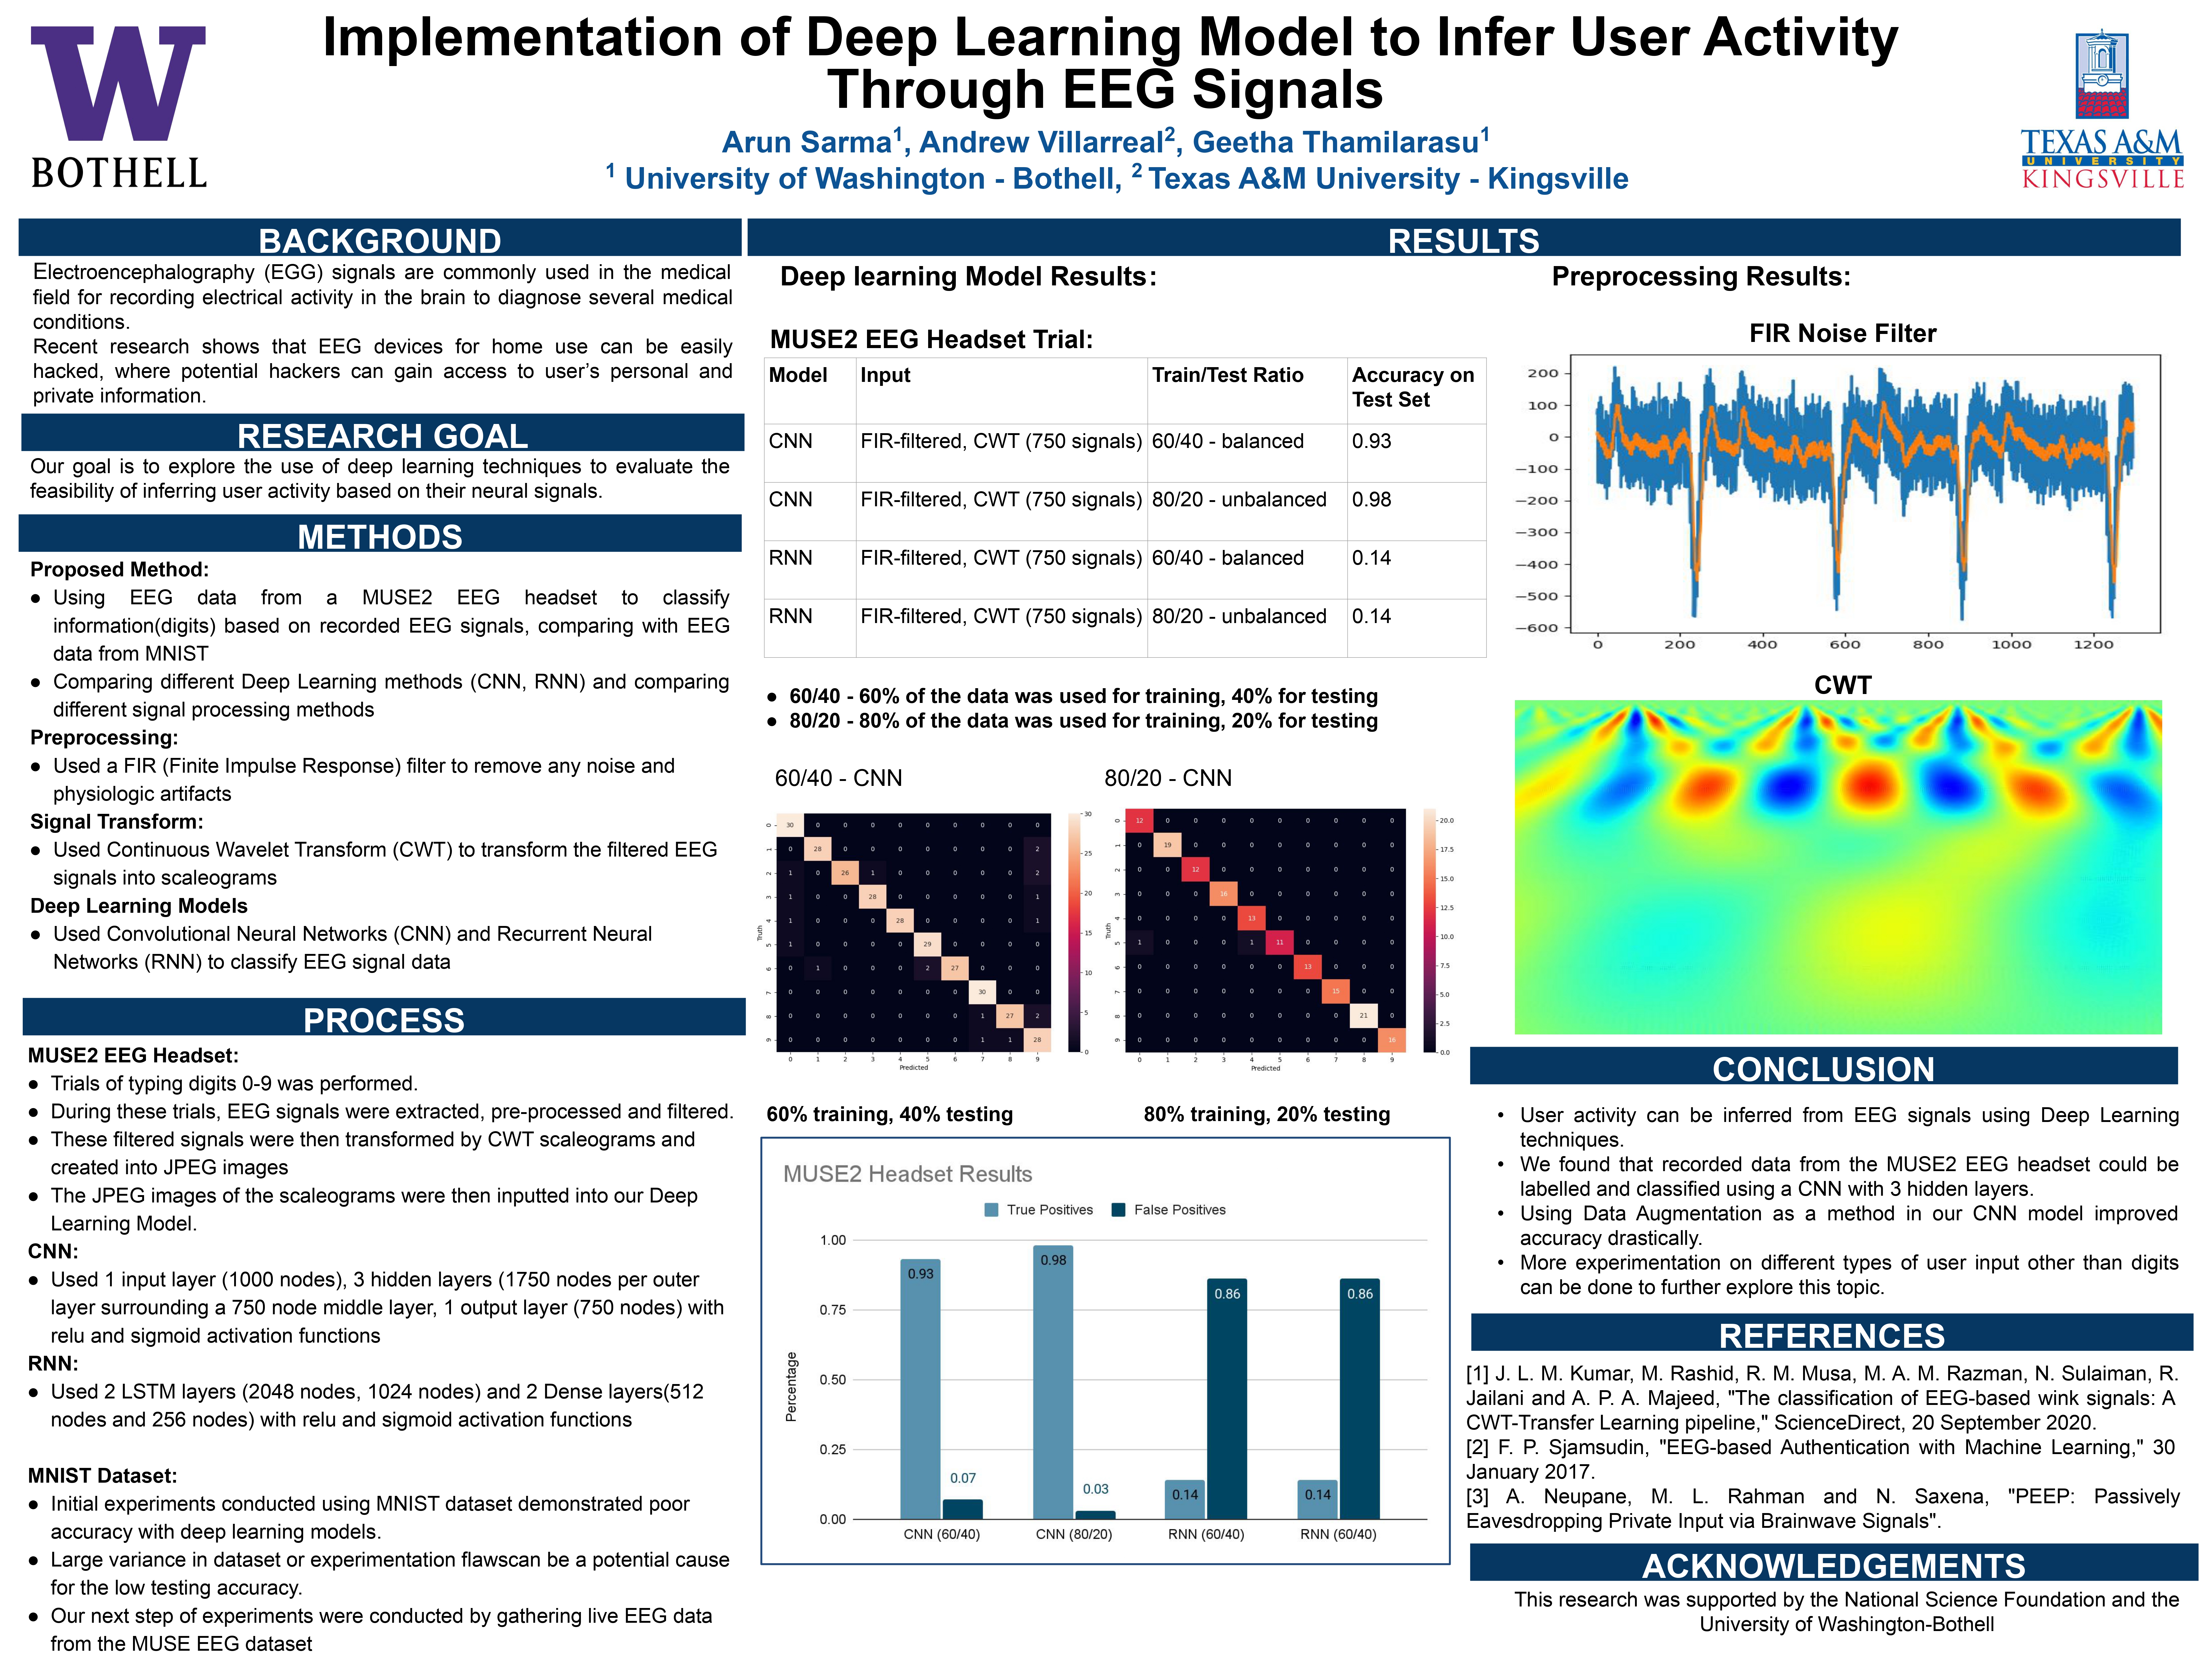 Implementation of Deep Learning Model to Infer User Activity Through EEG Signals Poster